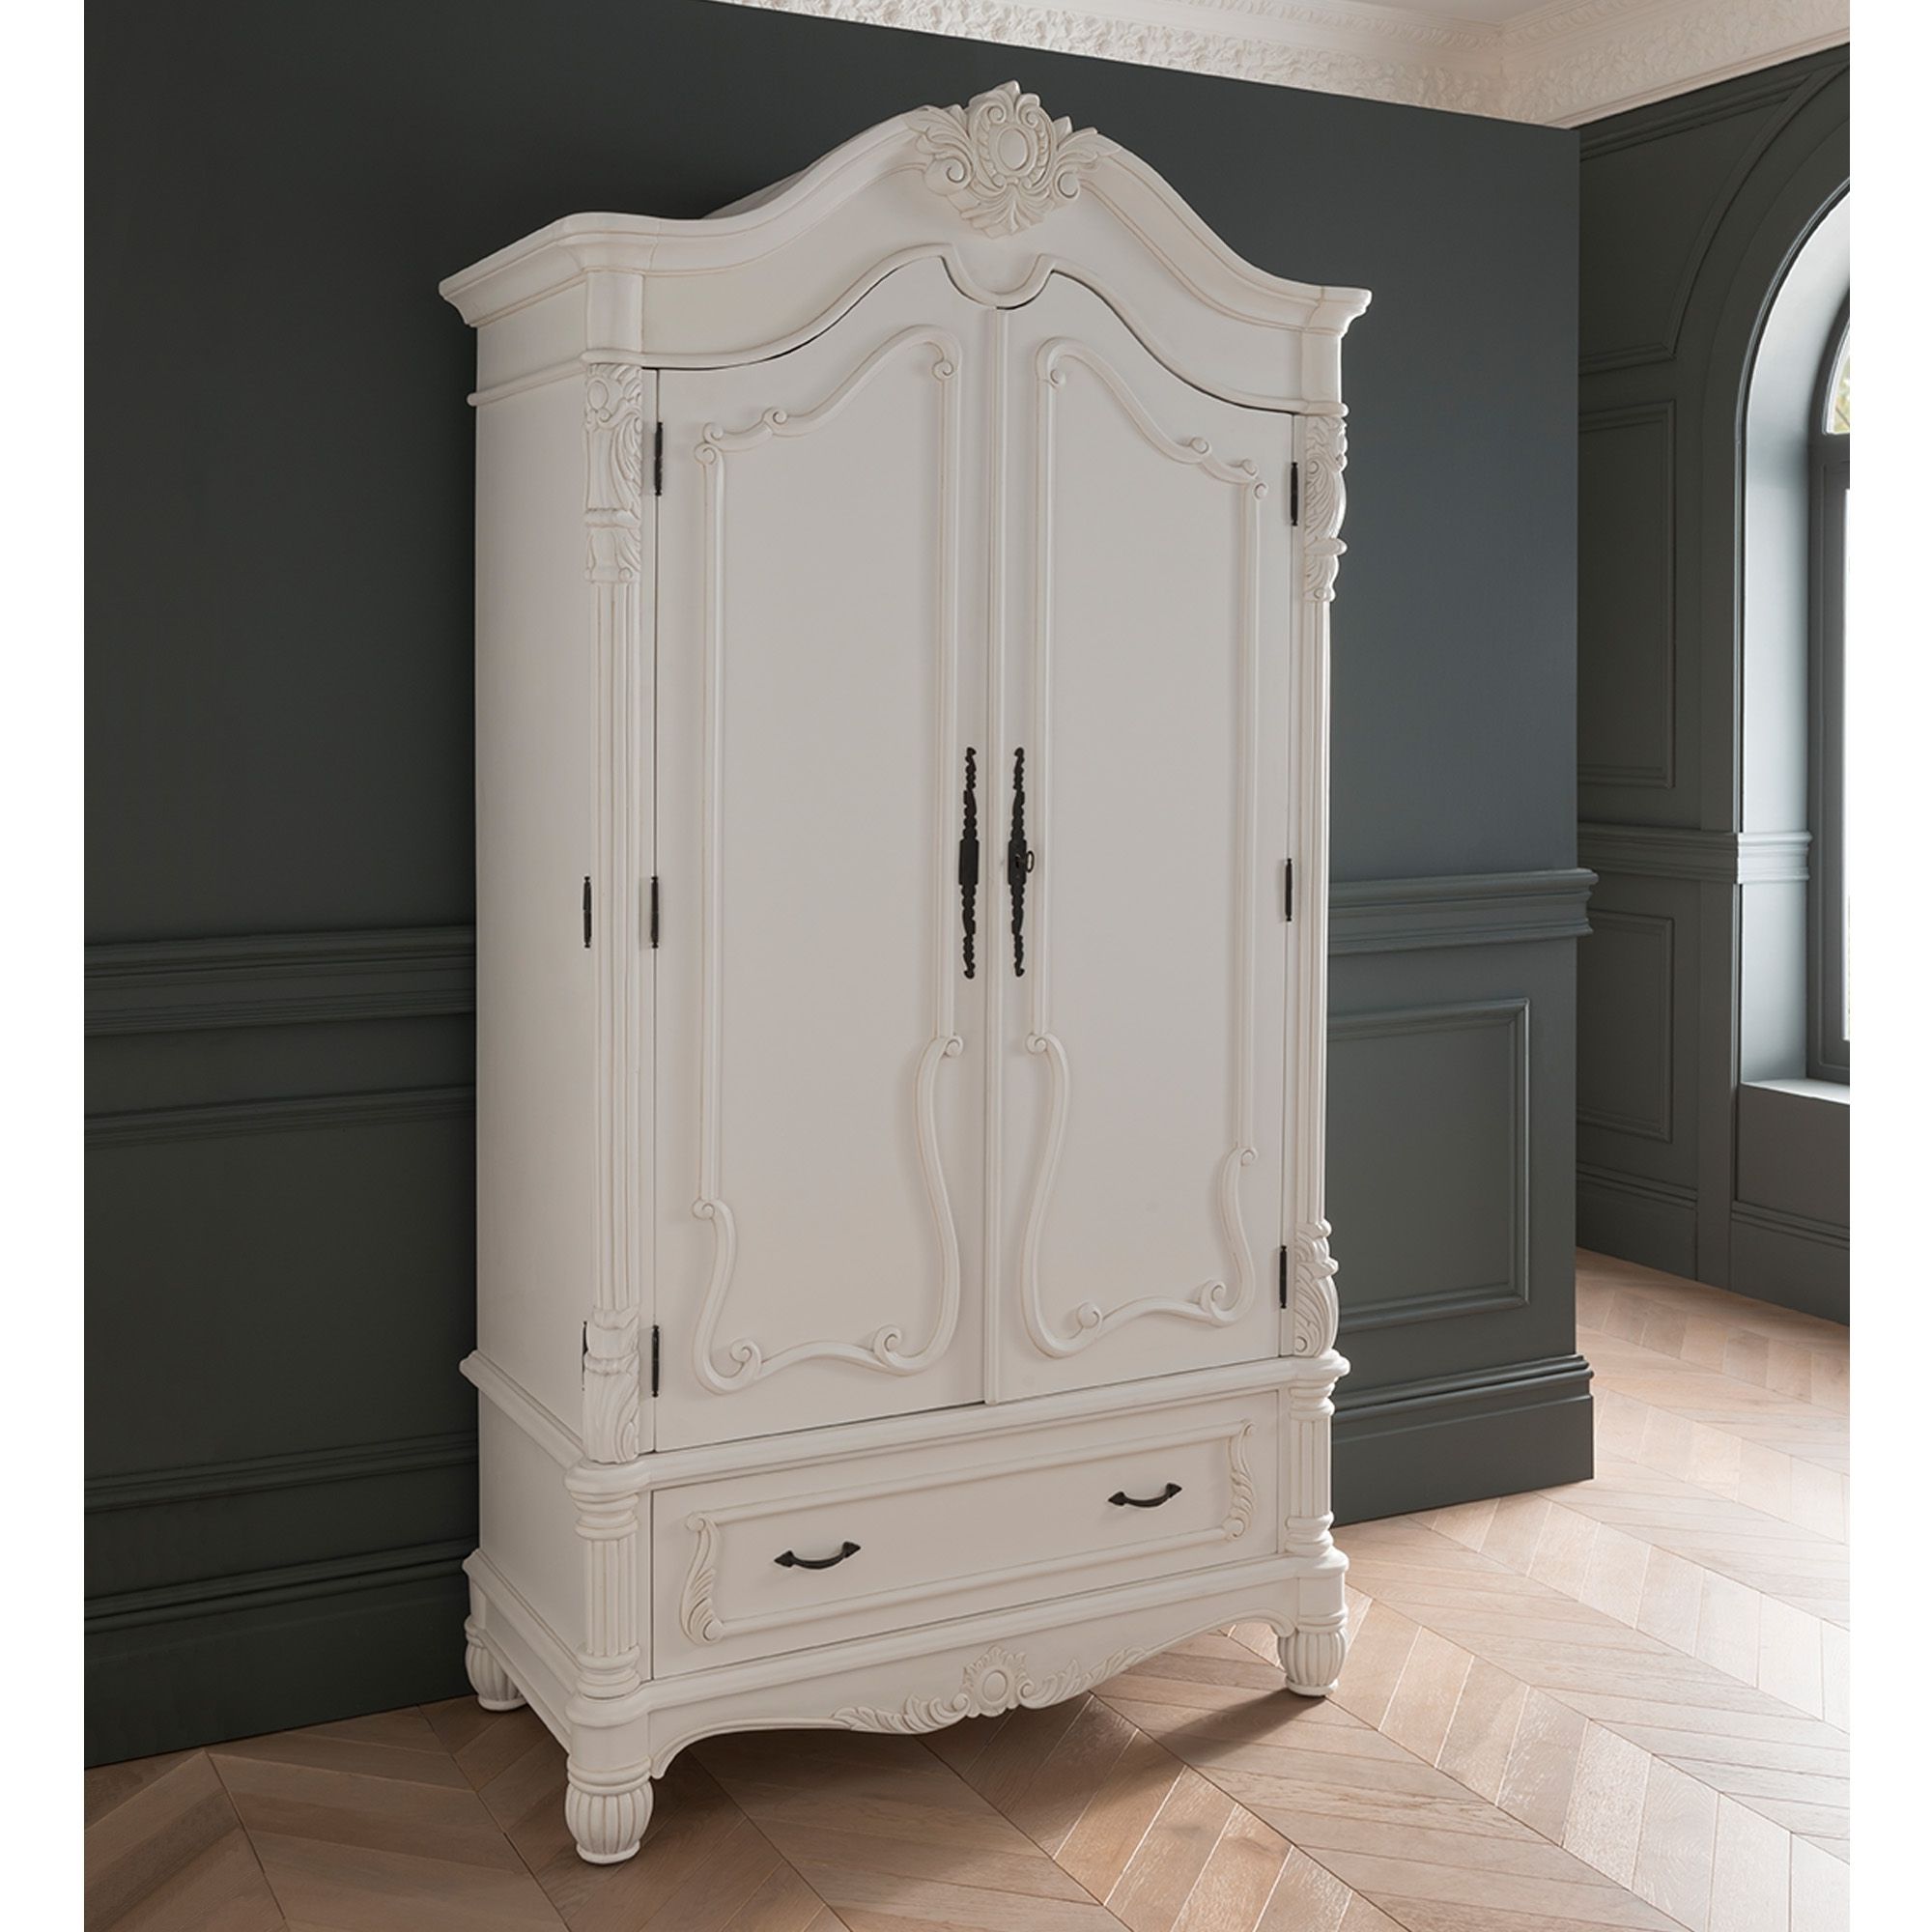 Antique French Style White Finished 1 Drawer Wardrobe | Homesdirect365 Intended For White French Style Wardrobes (Gallery 1 of 20)